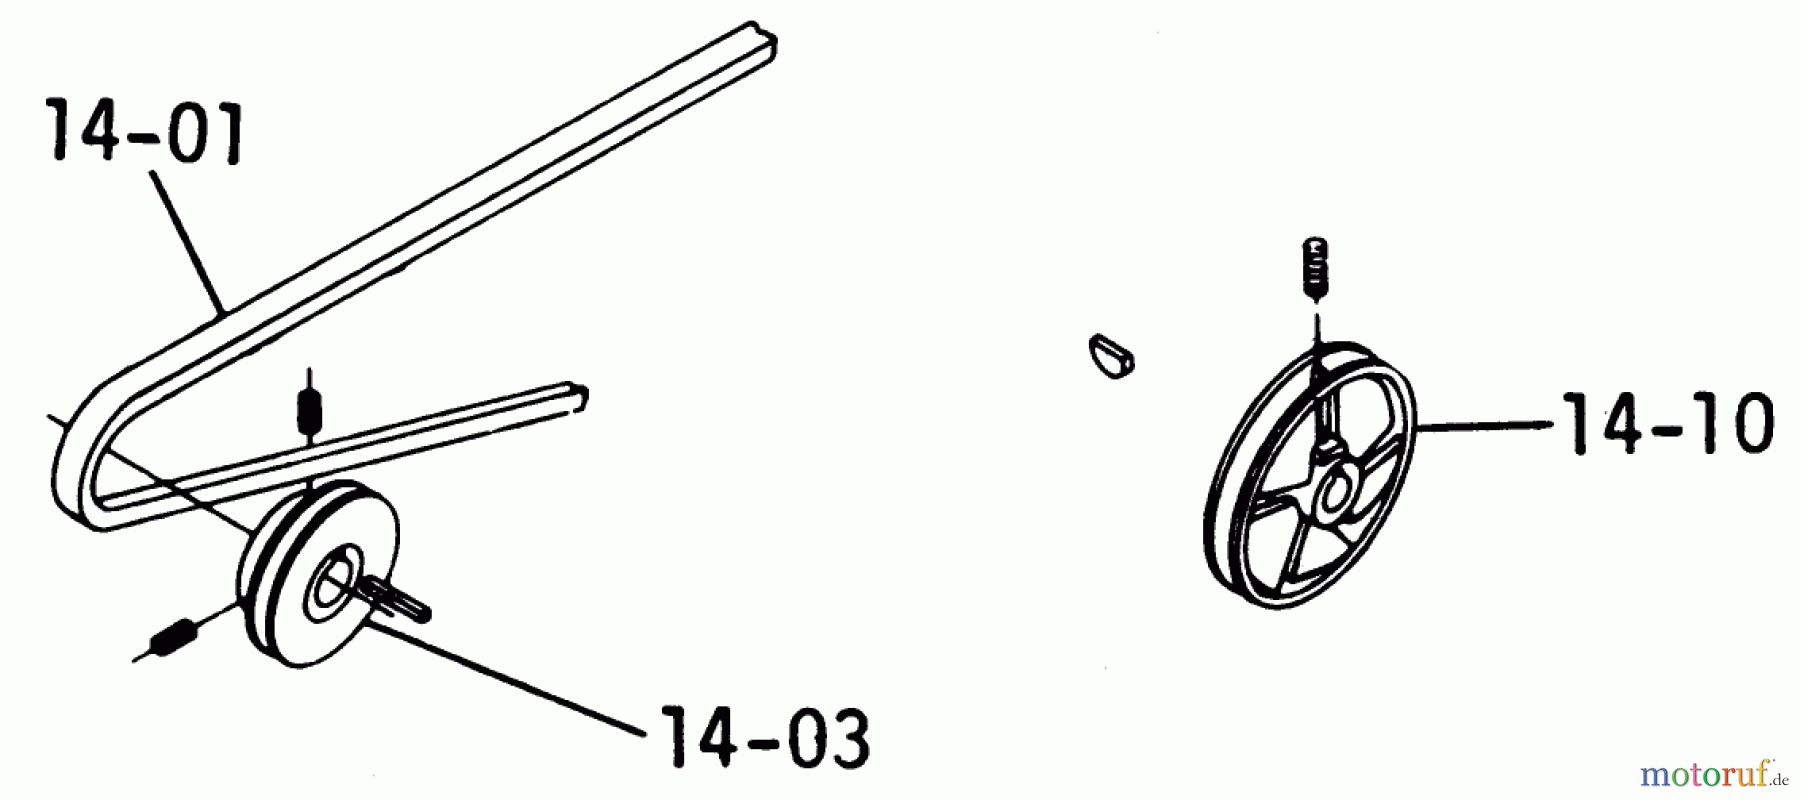  Toro Neu Mowers, Lawn & Garden Tractor Seite 1 1-0357 (C-120) - Toro C-120 8-Speed Tractor, 1975 14.000 DRIVE BELTS AND PULLEYS (FIG. 14A)